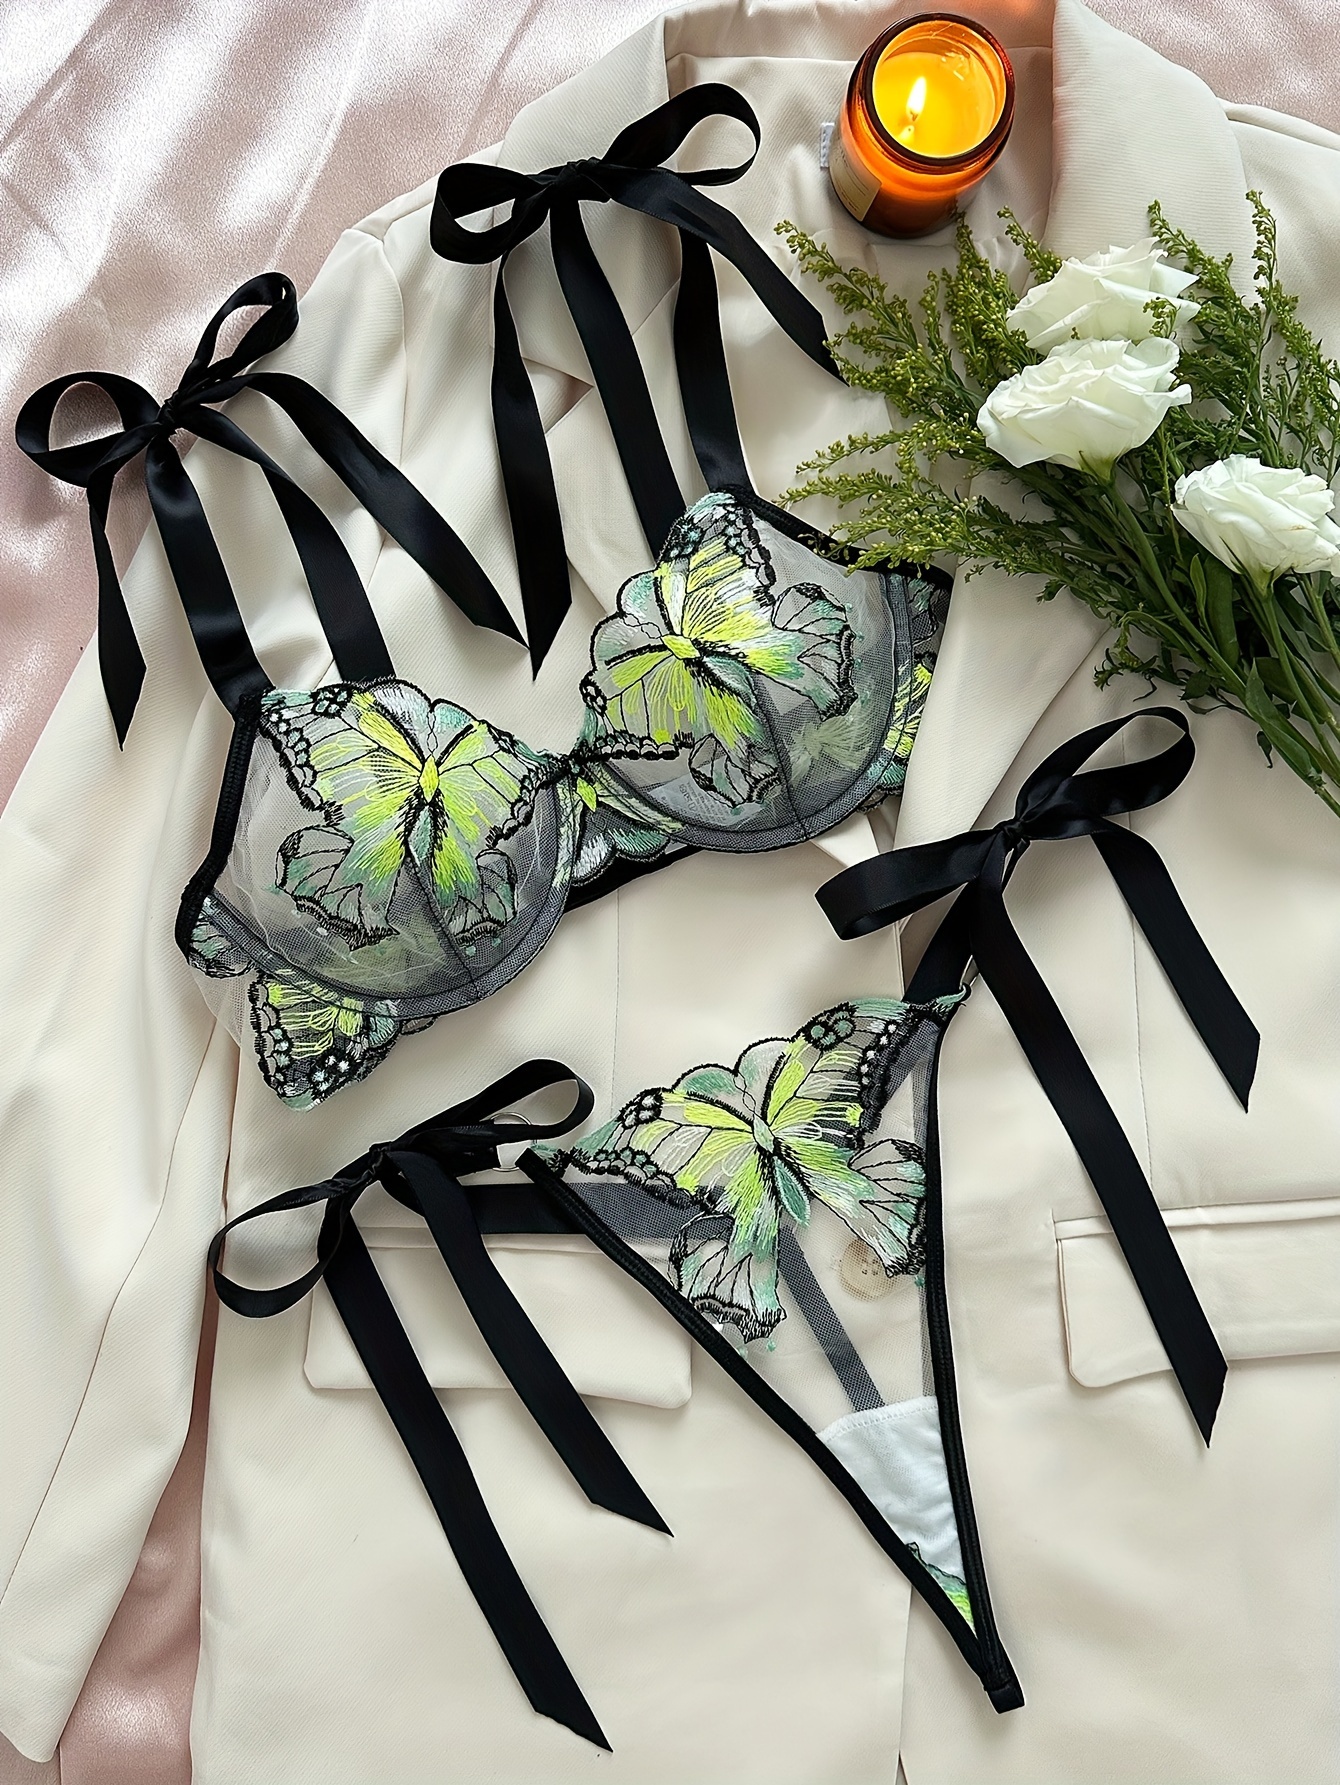 Meadow embroidery bra set – Rimless Lingerie